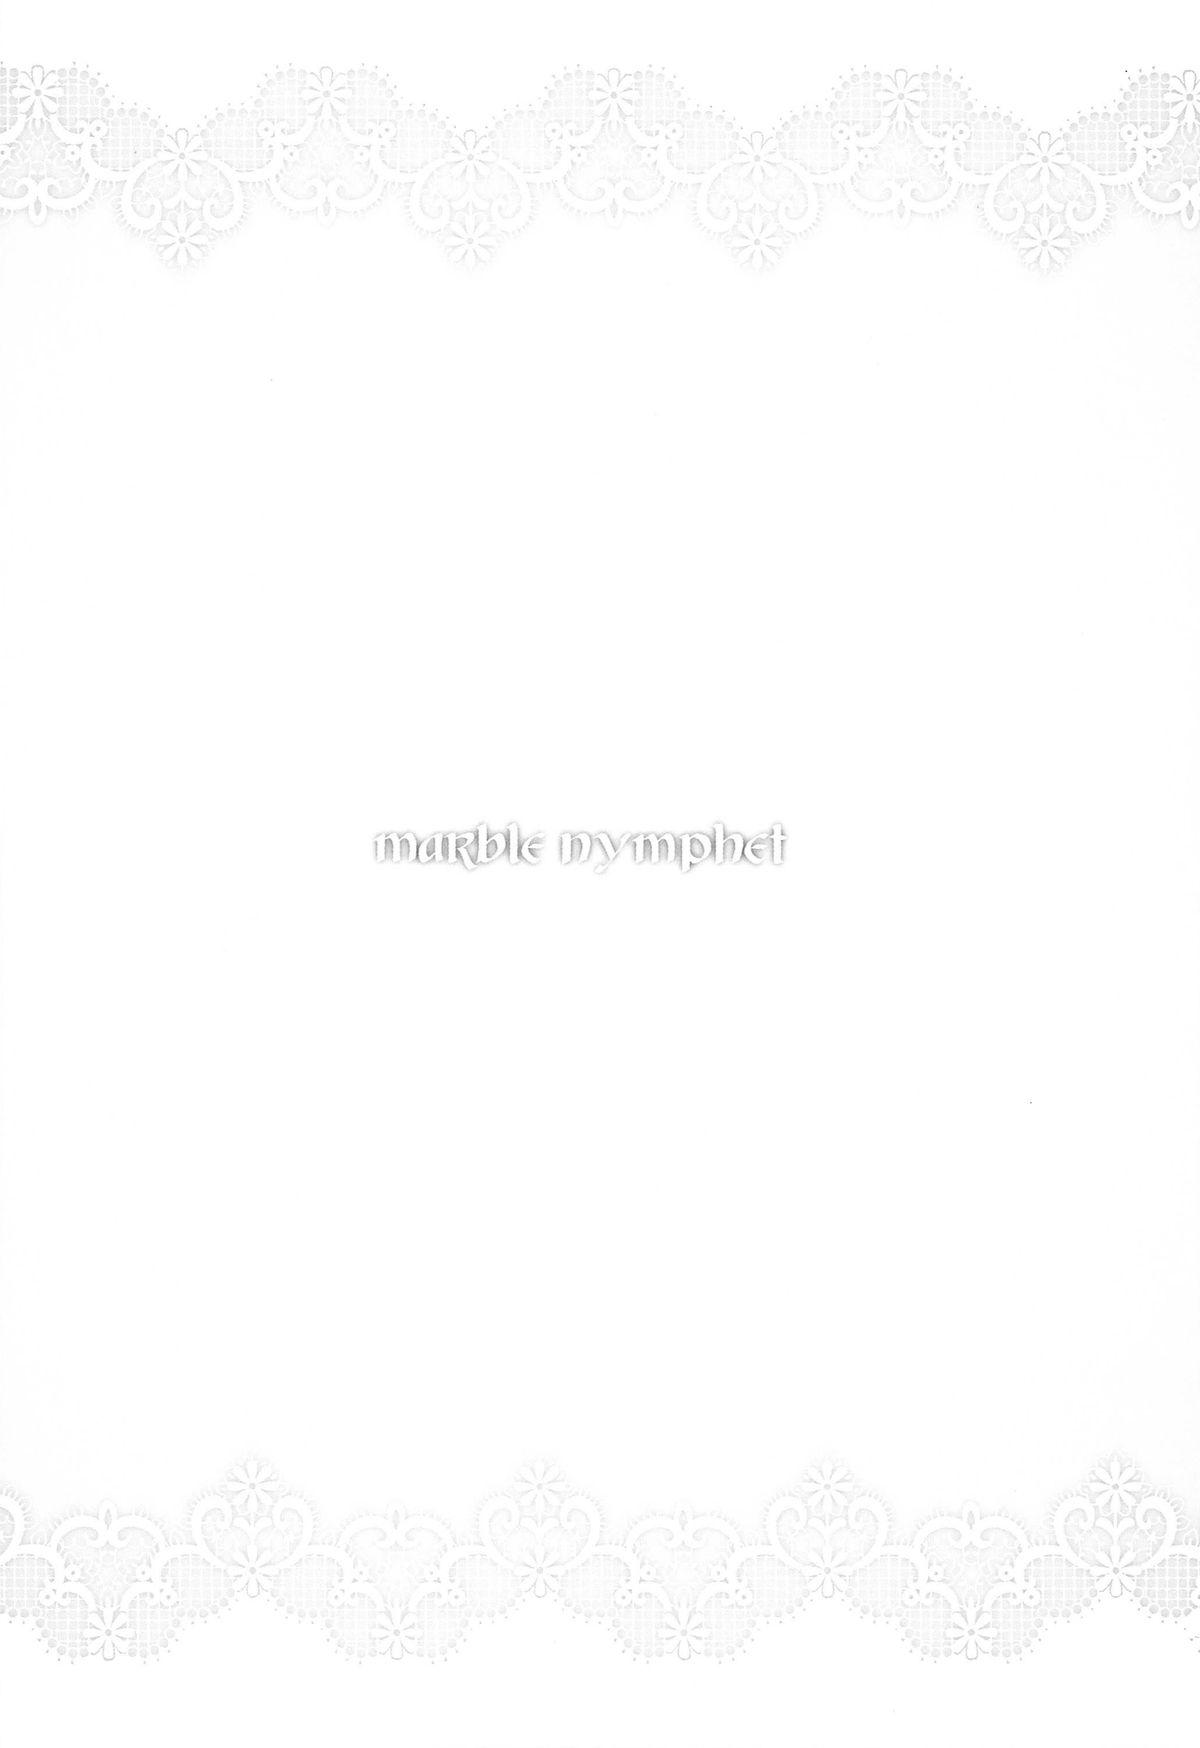 Tittyfuck marble nymphet - To love-ru Amatur Porn - Page 4